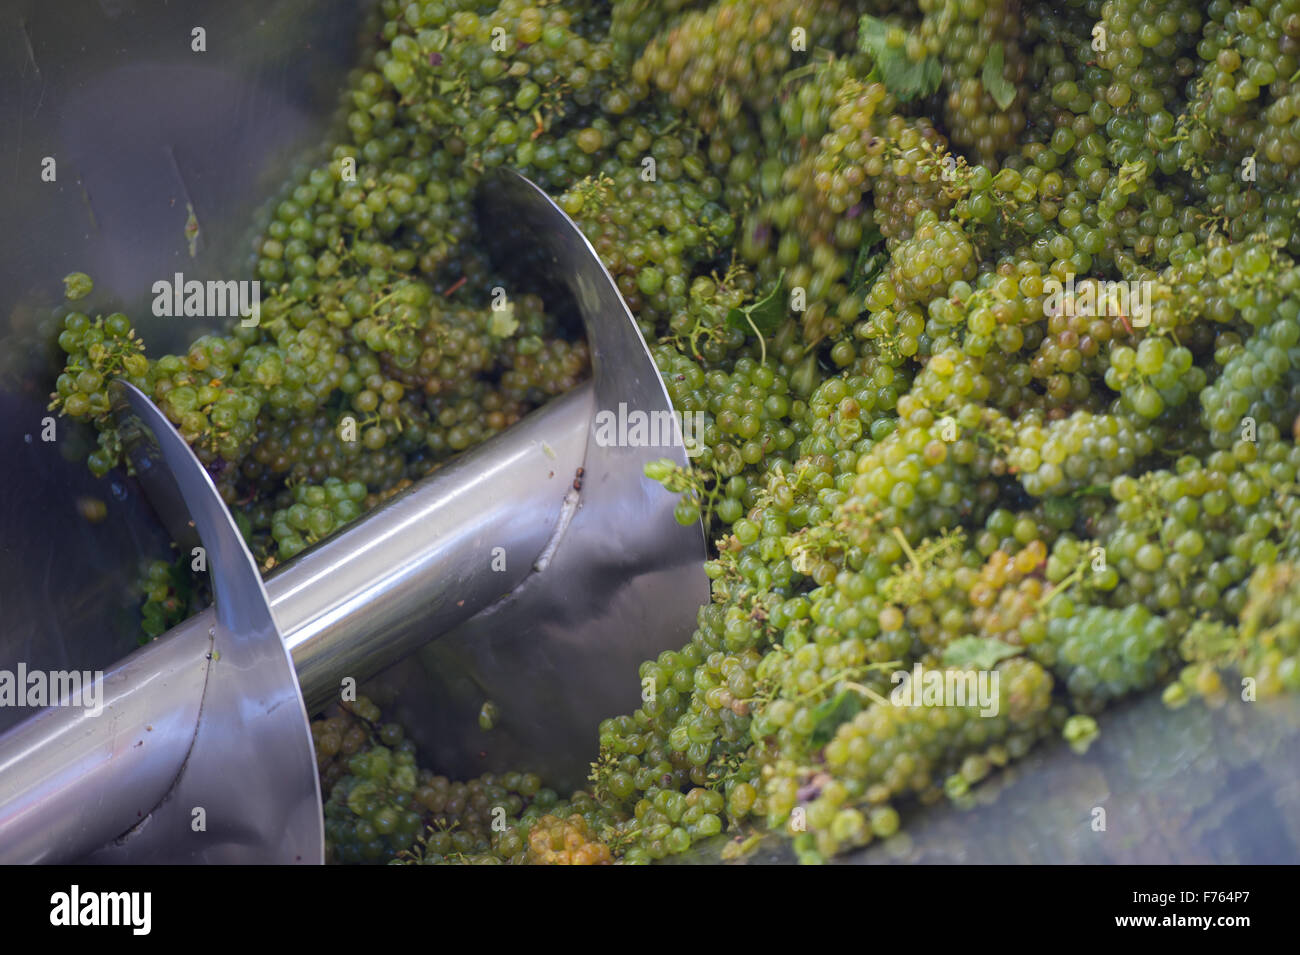 SOUTH AFRICA- Process of grapes being made in to wine Stock Photo